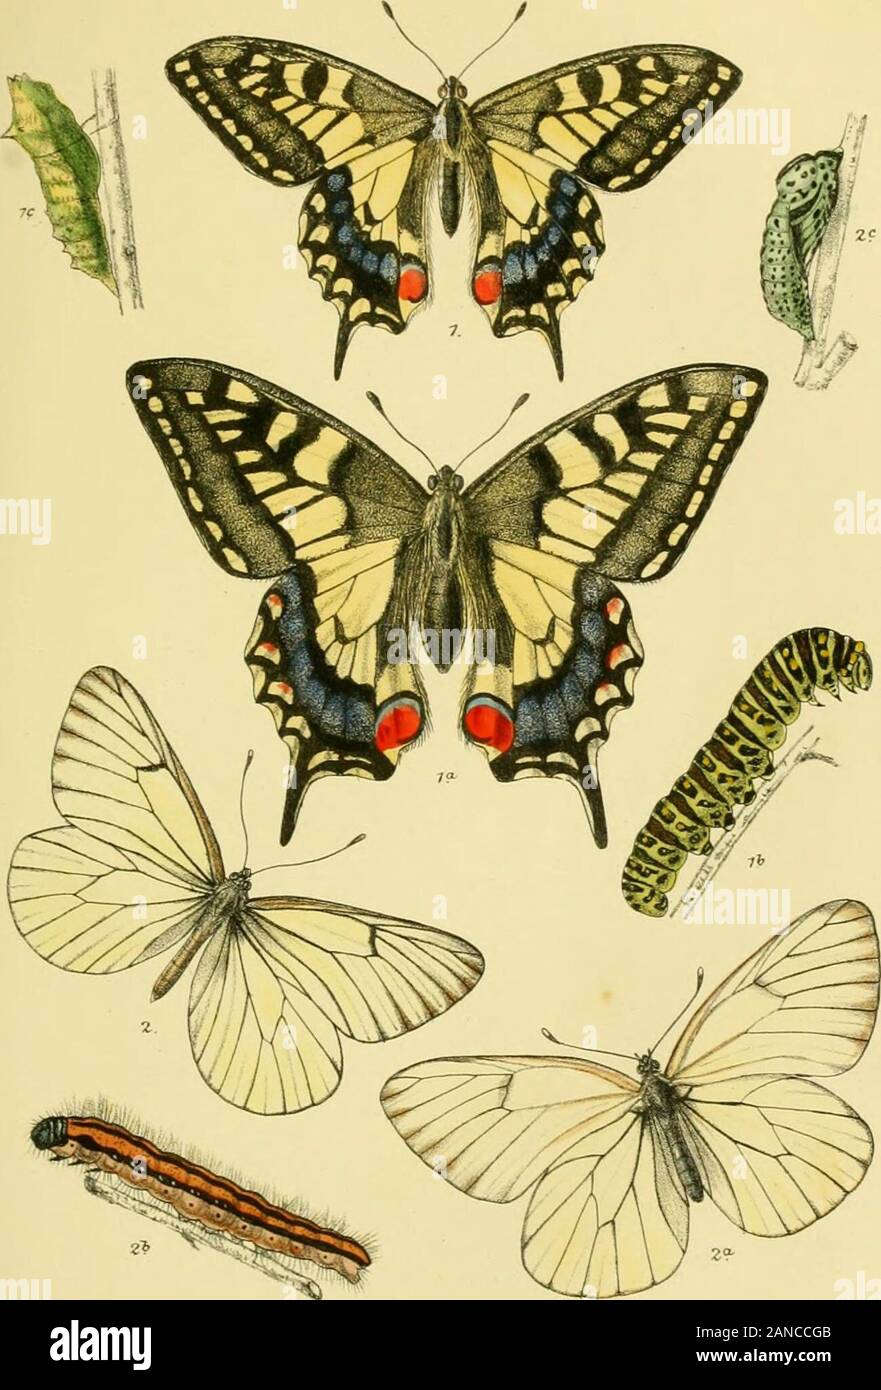 The Lepidoptera of the British Islands : a descriptive account of the families, genera, and species indigenous to Great Britain and Ireland, their preparatory states, habits, and localities . us) . 272 (Gordius) . 61 Melitsea 185 (Thais) 17 Phla?as 62 Artemis . 196 (Eumina) . ?7 (Virgaureffi) 55 Atbalia 185 Thecla. 42 Coenonympha 255 Cinxia 190 betula; 43 (Arcania) . 262 (Didyma). 190 (ilicls) 48 Davus 255 Nemeobius . 102 pruni 48 Pamphilus 263 Lucina 102 querciis 51 Colias . 32 Nisoniades . 304 rubi . 53 Edusa 35 Tages . 304 (spini) 48 Hyale 32 Papilio 13 w-album . 45 Cyclopides . 298 Machaon Stock Photo